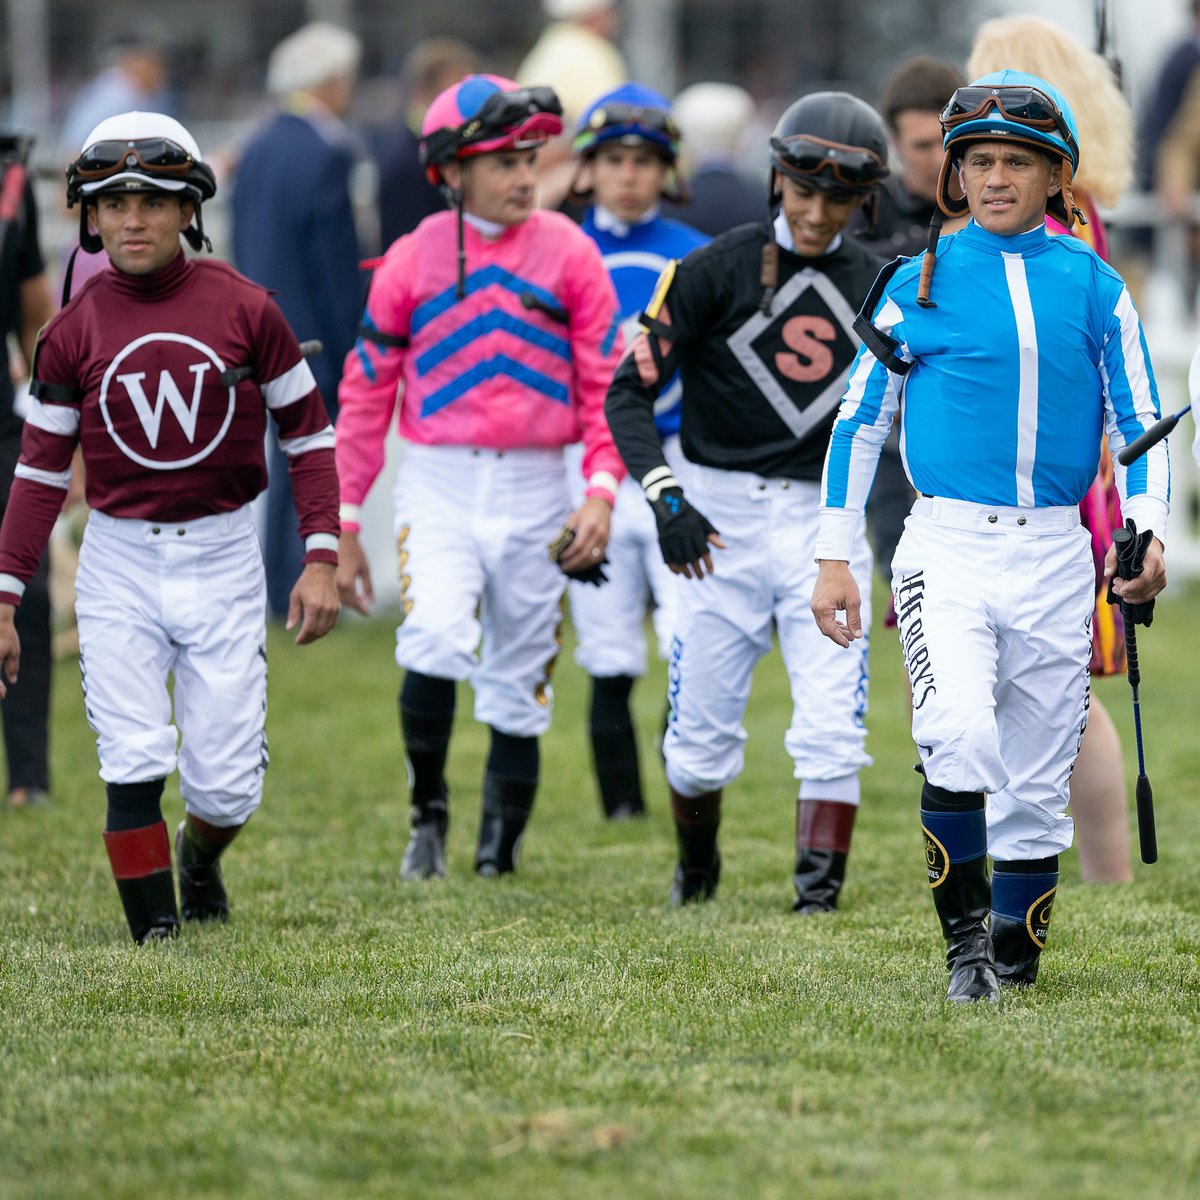 Top jockeys 🤝 top Thoroughbreds. Who are you hoping to see at #Preakness149 weekend?